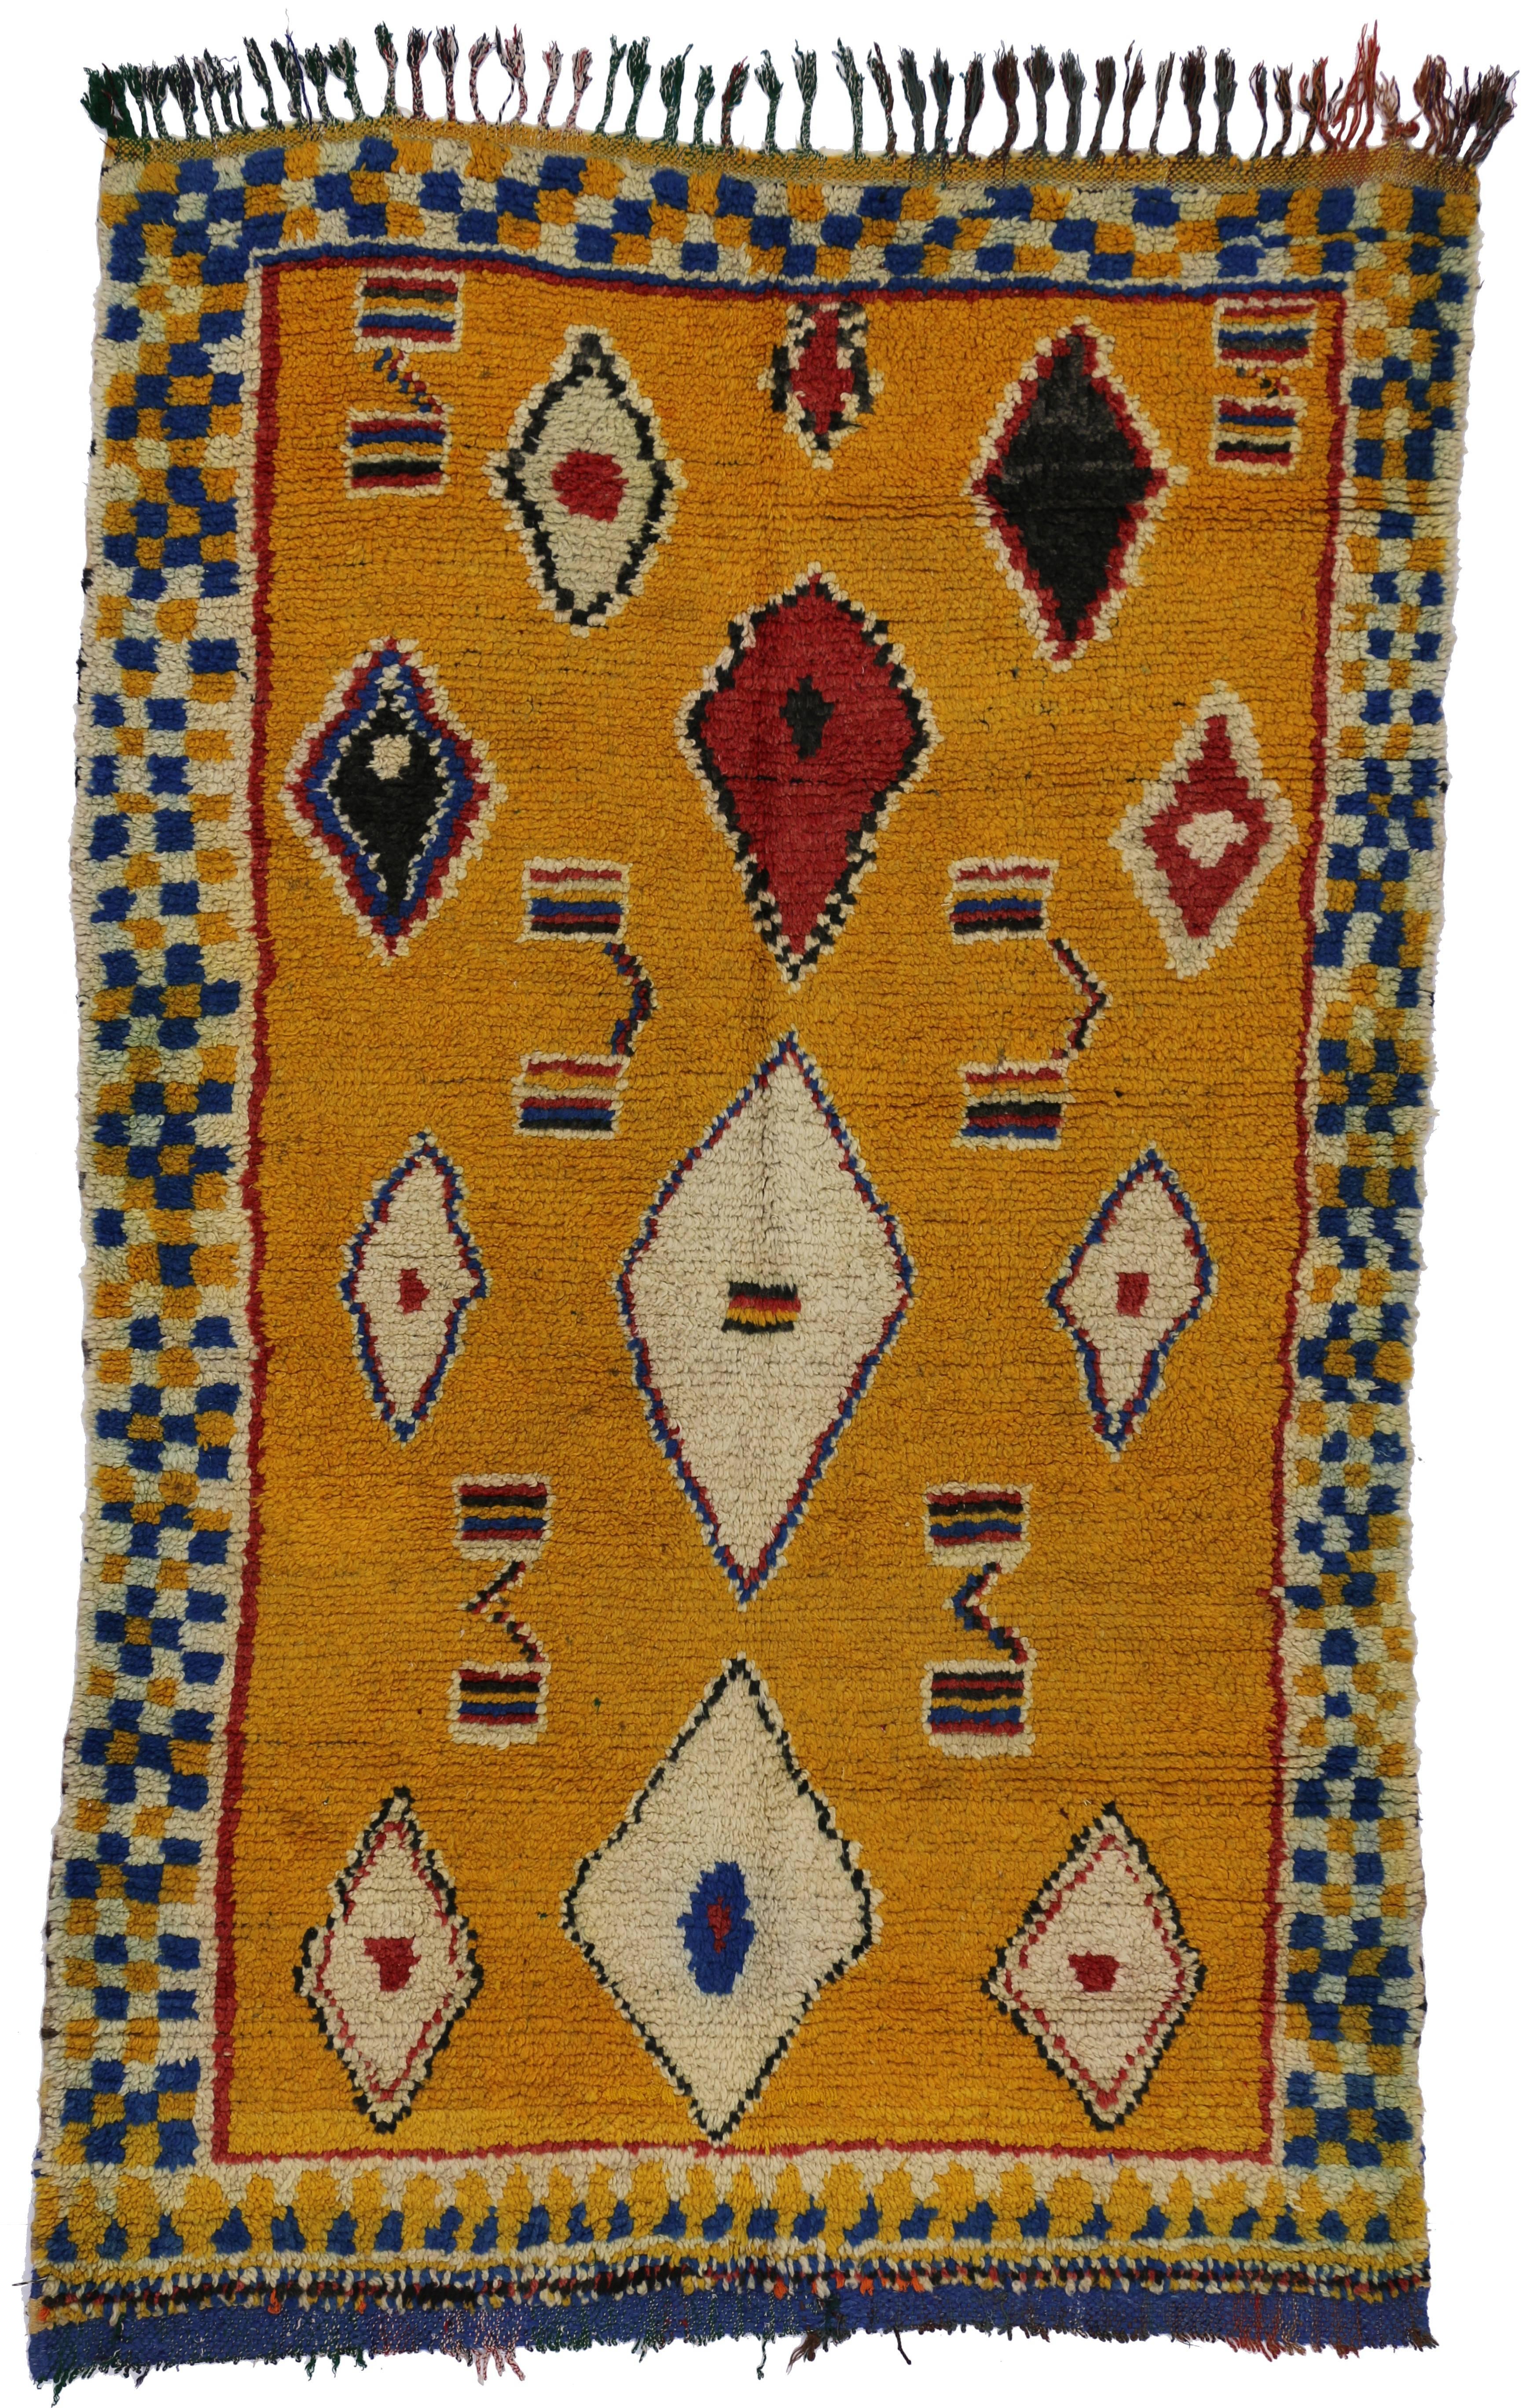 With its diamond protection motifs and vivid Saffron Turmeric colored field, this Berber Moroccan rug is believed to symbolize eternity while protecting the human spirit from negative energy and shielding the human body from the elements. The hints